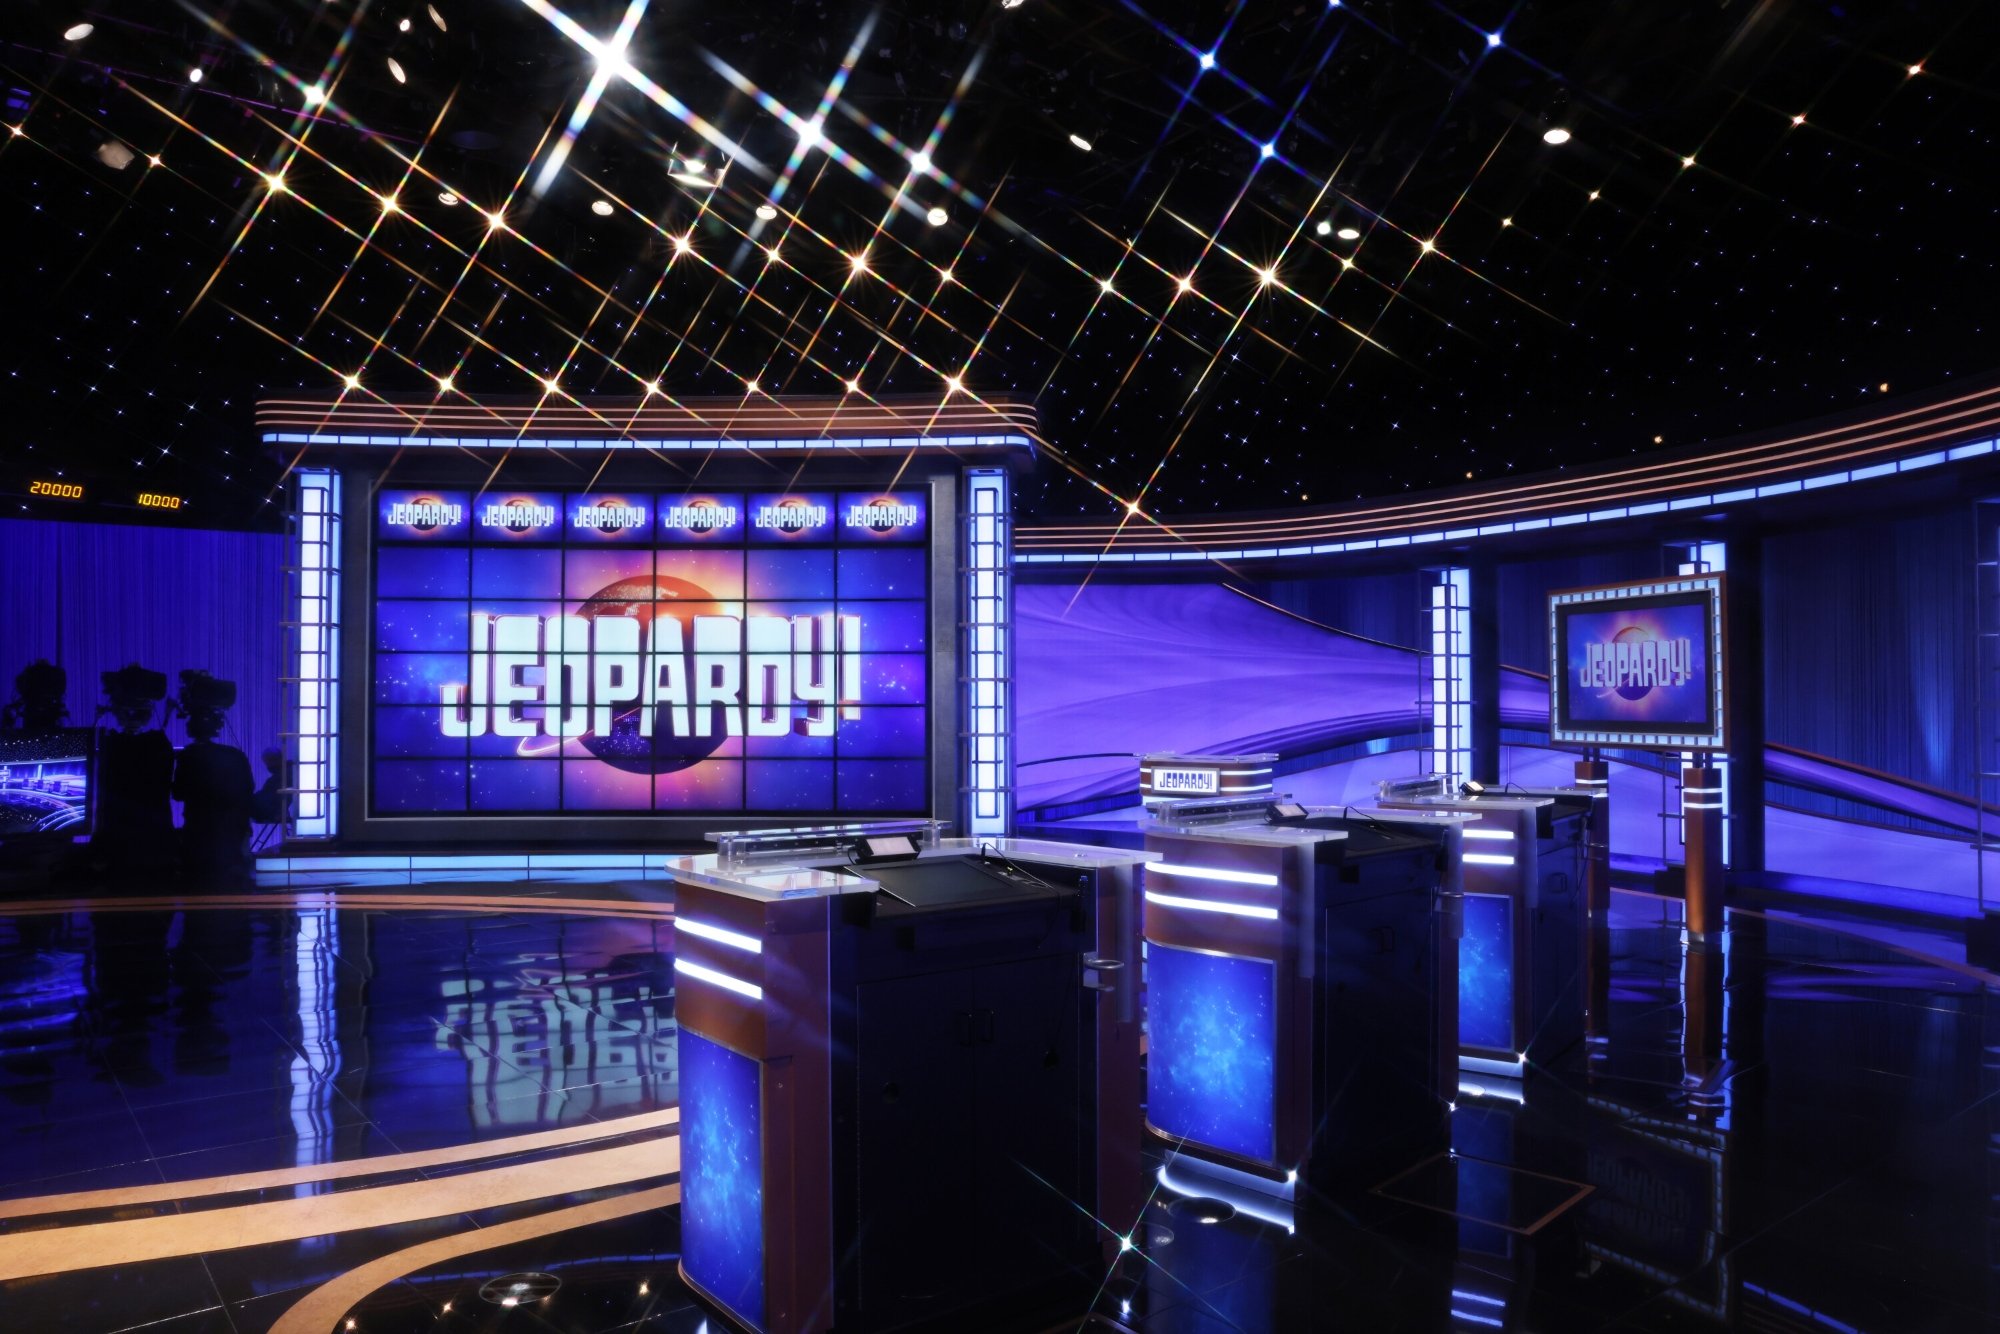 ‘Jeopardy!’ Producer Wants ‘Great’ Cash Bonus Rule Change That Could Increase Players’ Prize Winnings